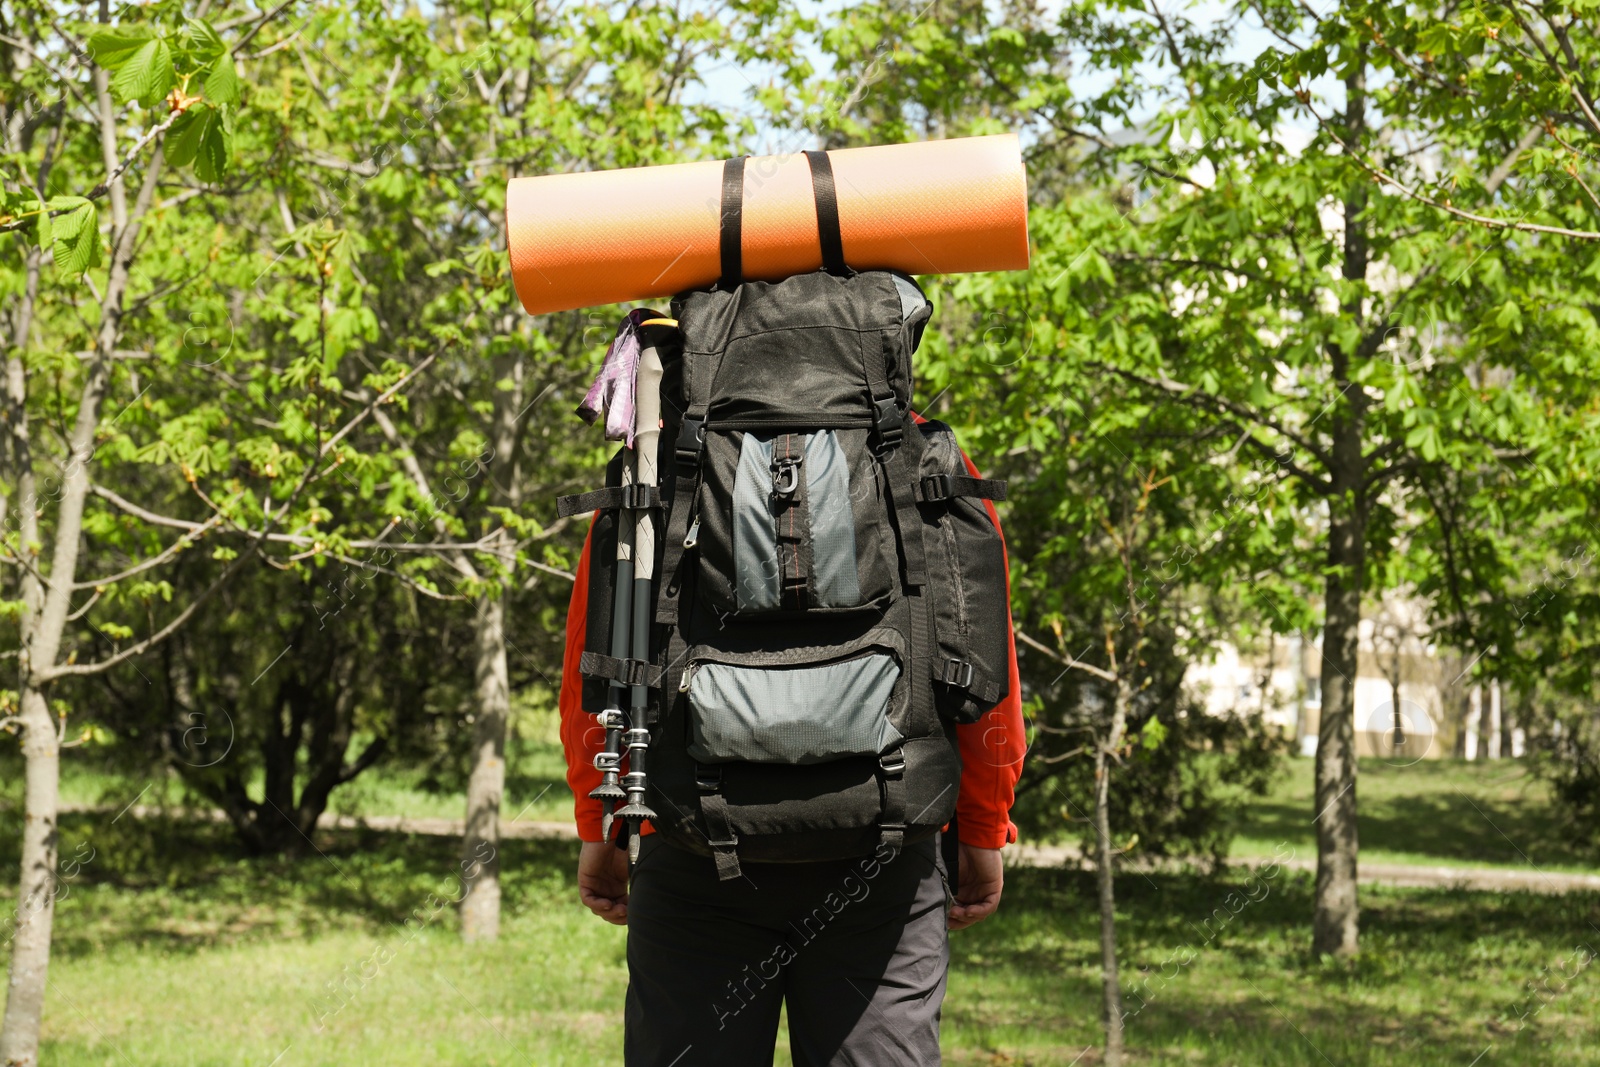 Photo of Hiker with backpack ready for journey in park, back view